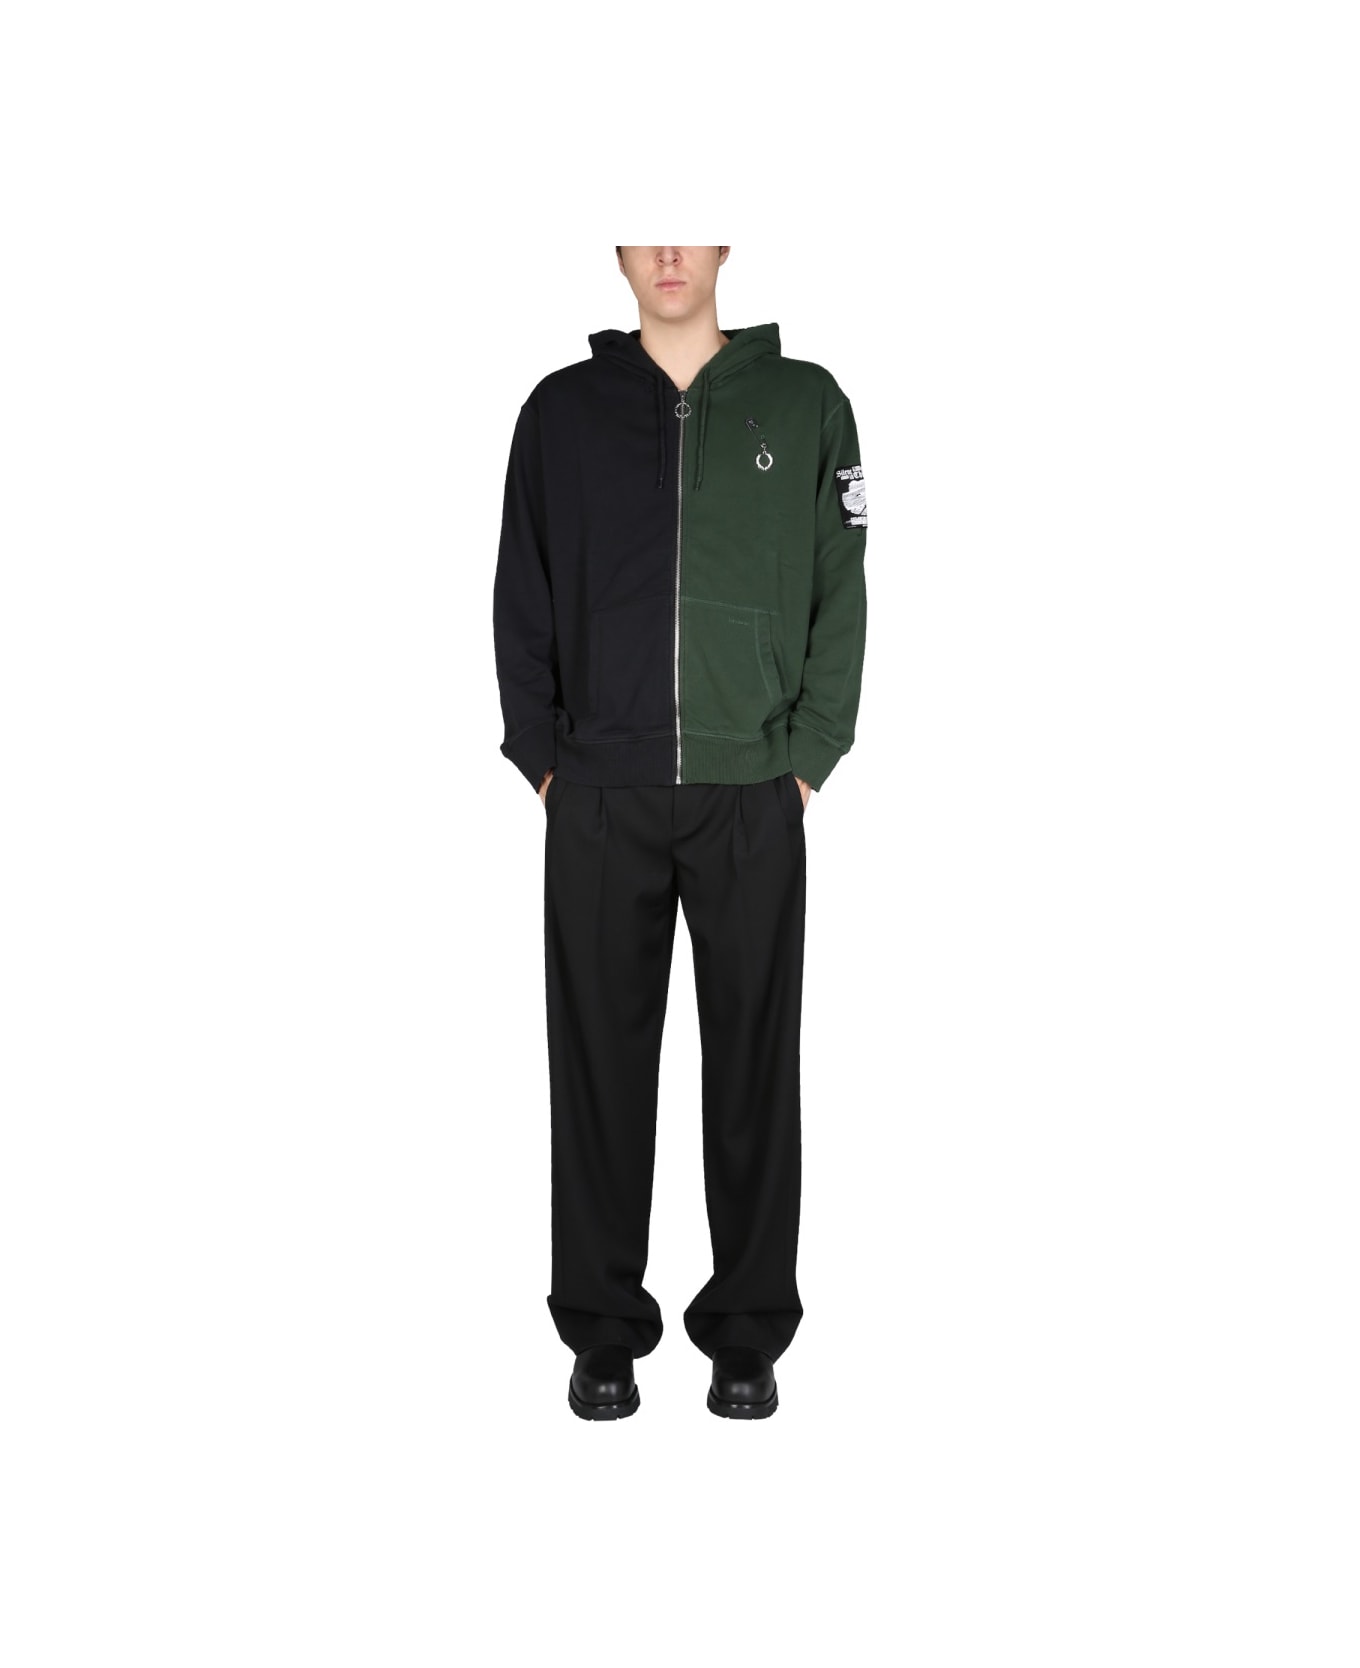 Fred Perry by Raf Simons Zip Sweatshirt. - MULTICOLOUR